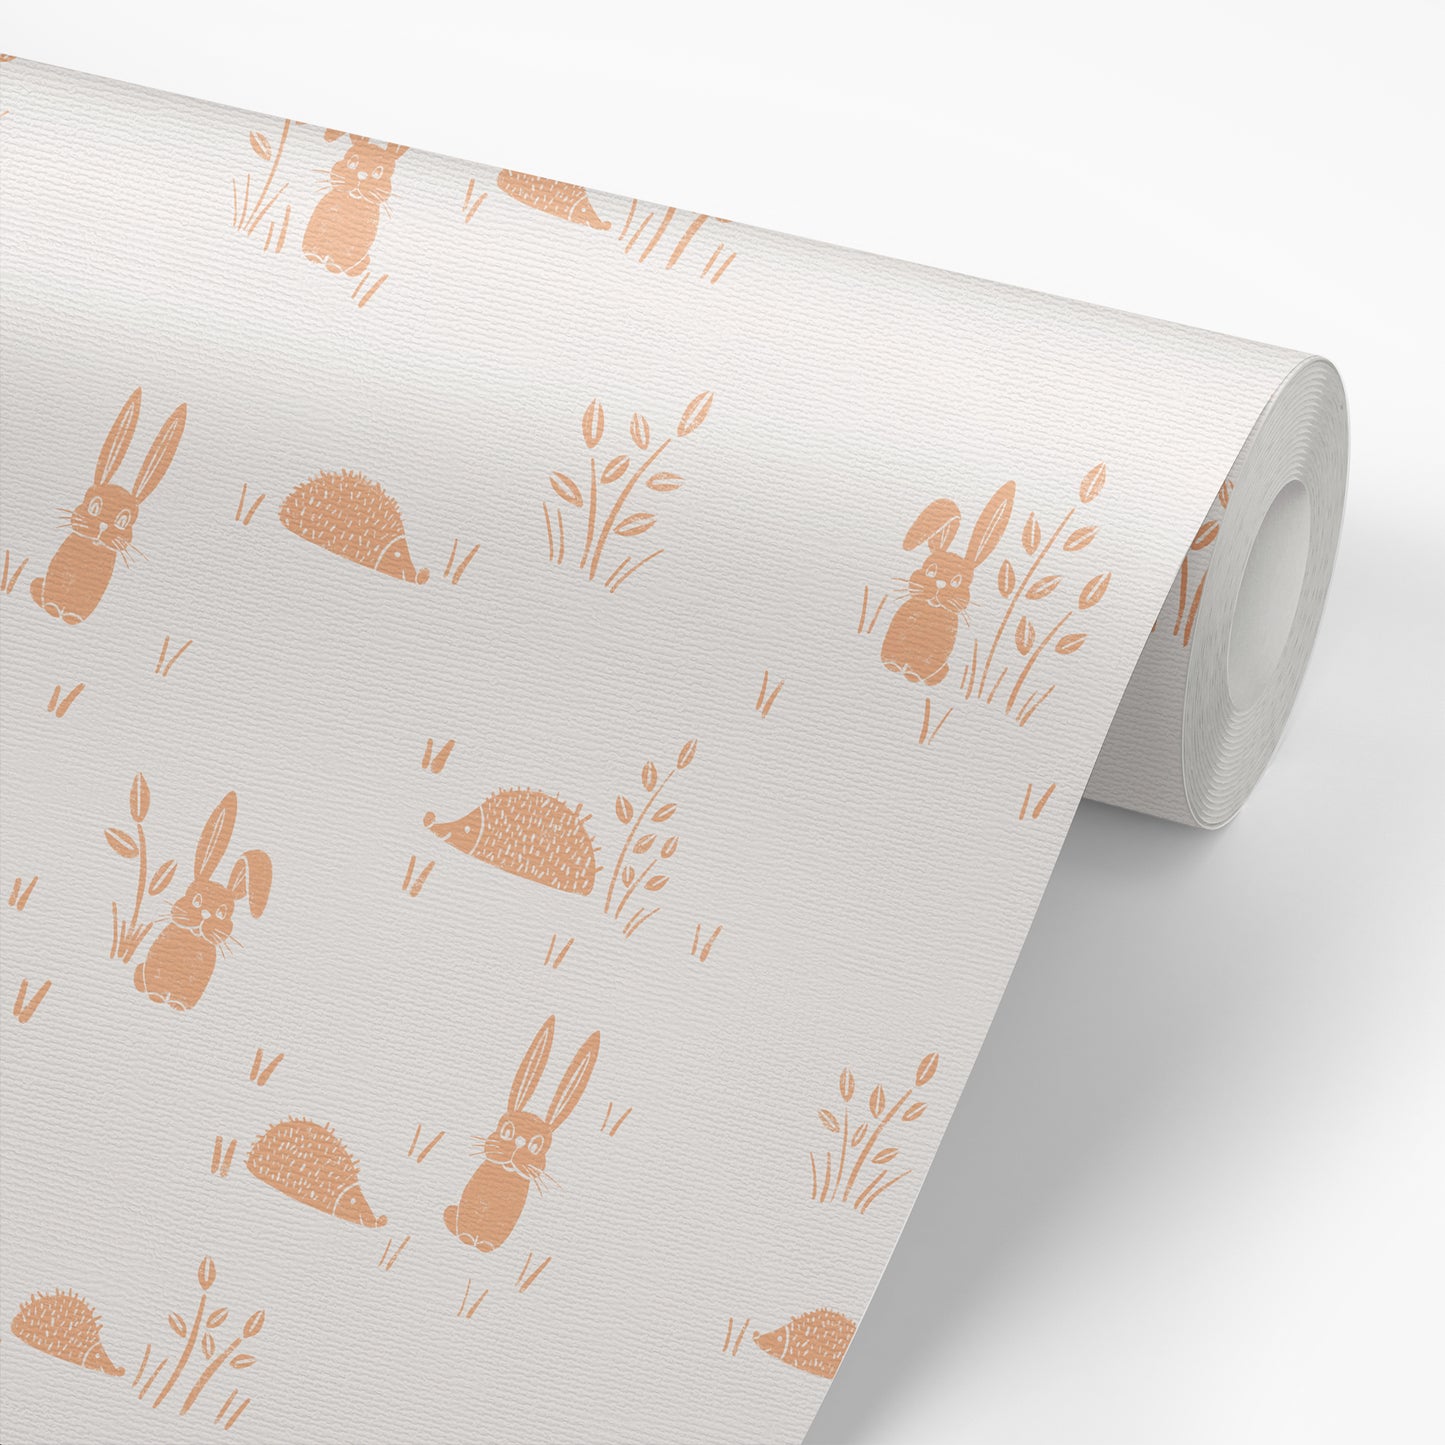 Hedgehogs and Rabbits Wallpaper in Apricot shown on a roll of wallpaper.